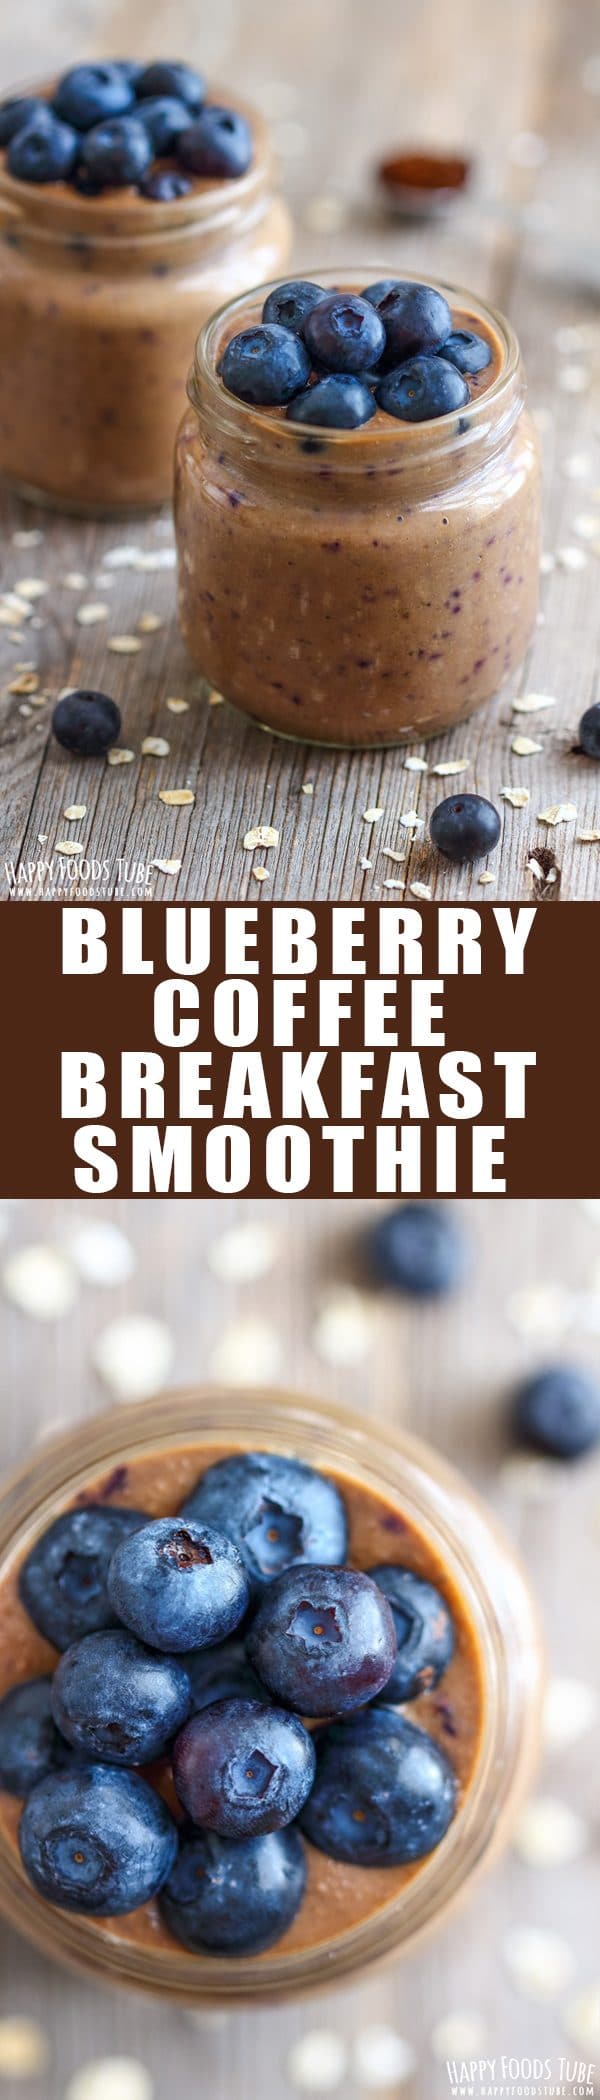 Blueberry Coffee Breakfast Smoothie Recipe Picture